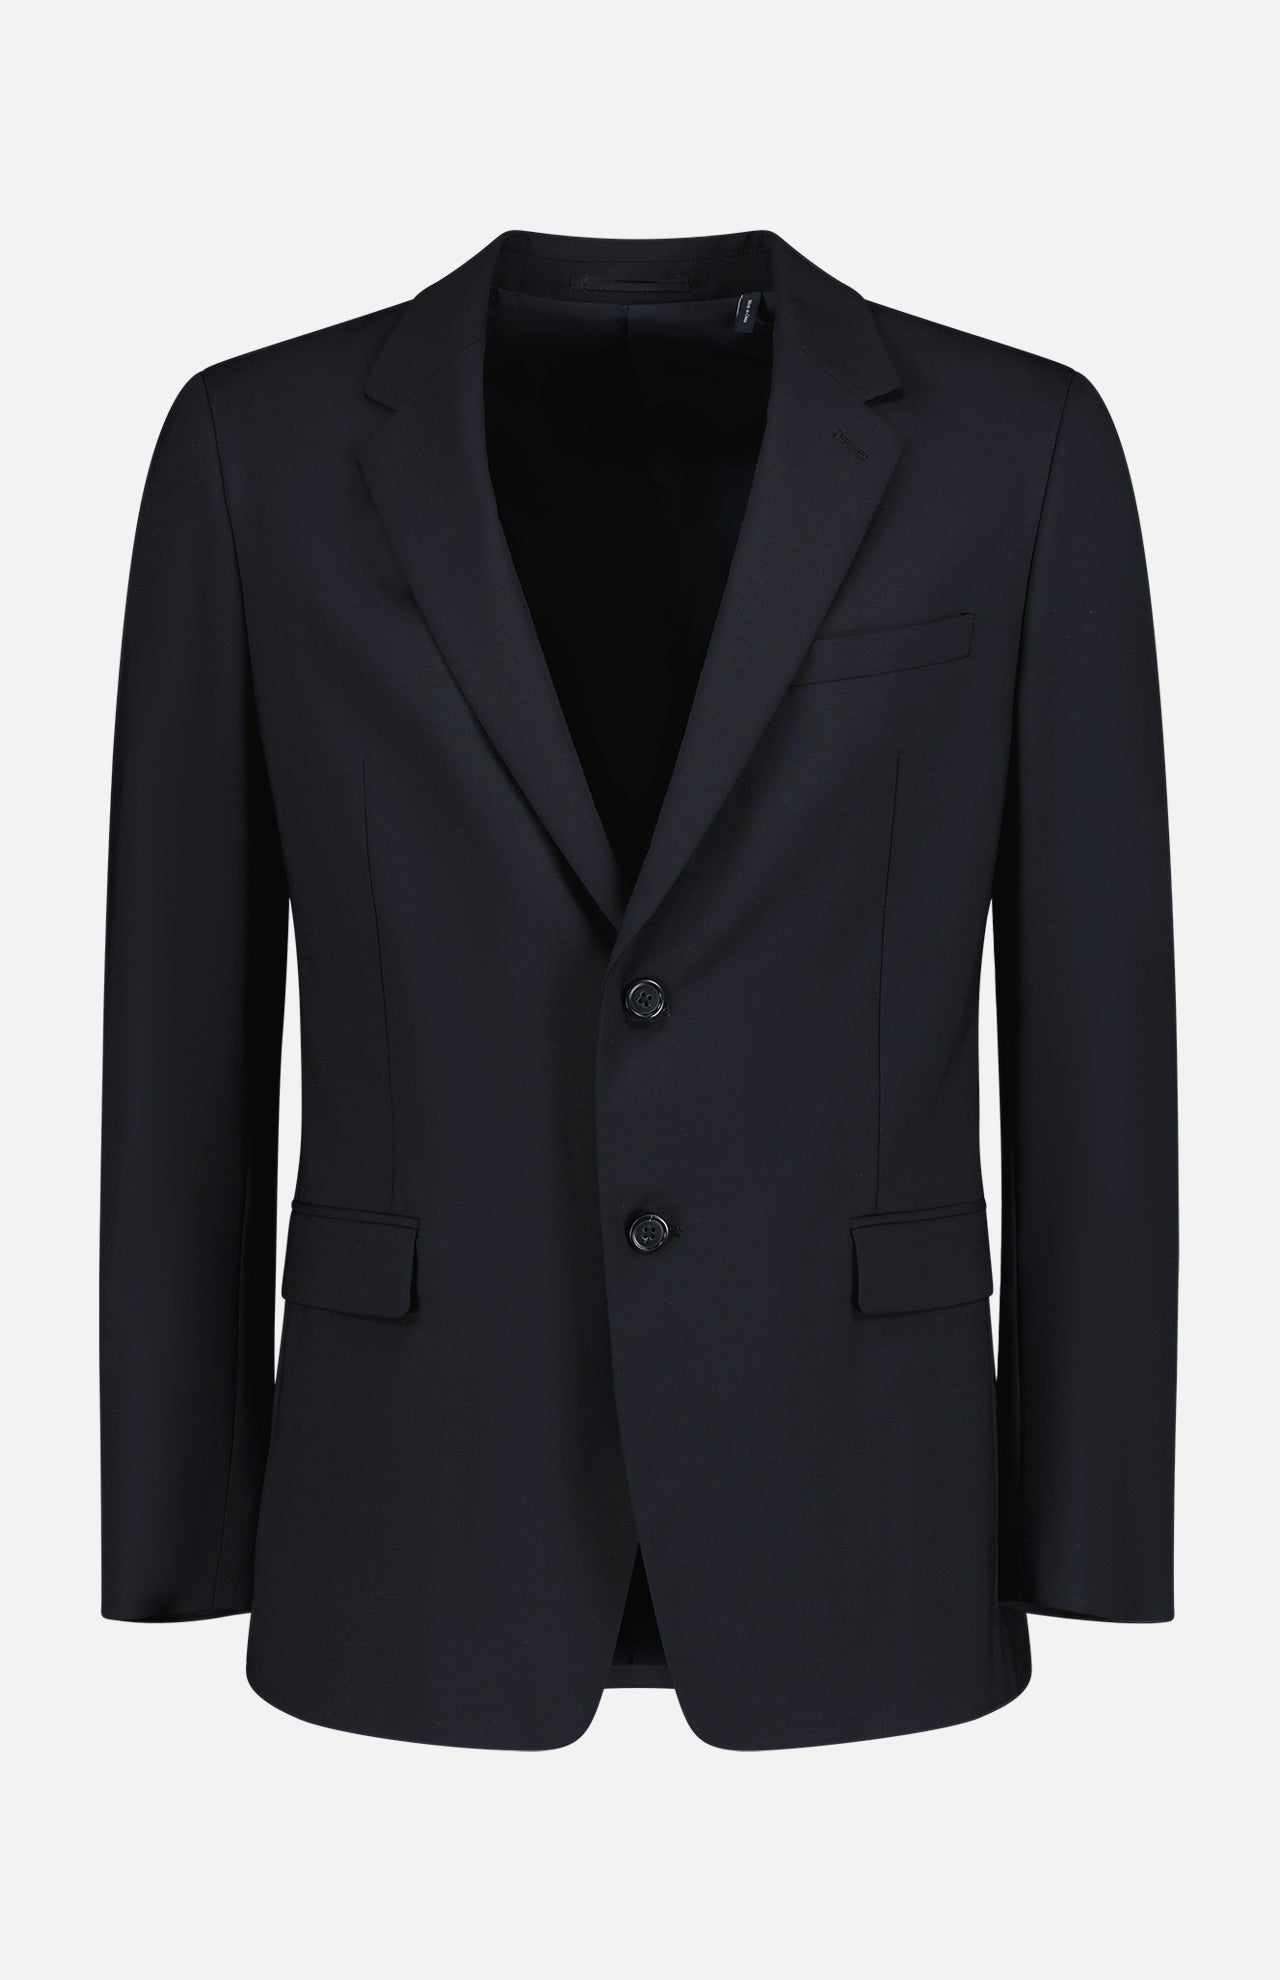 Chambers New Tailor Sportcoat Black (1037494648947)